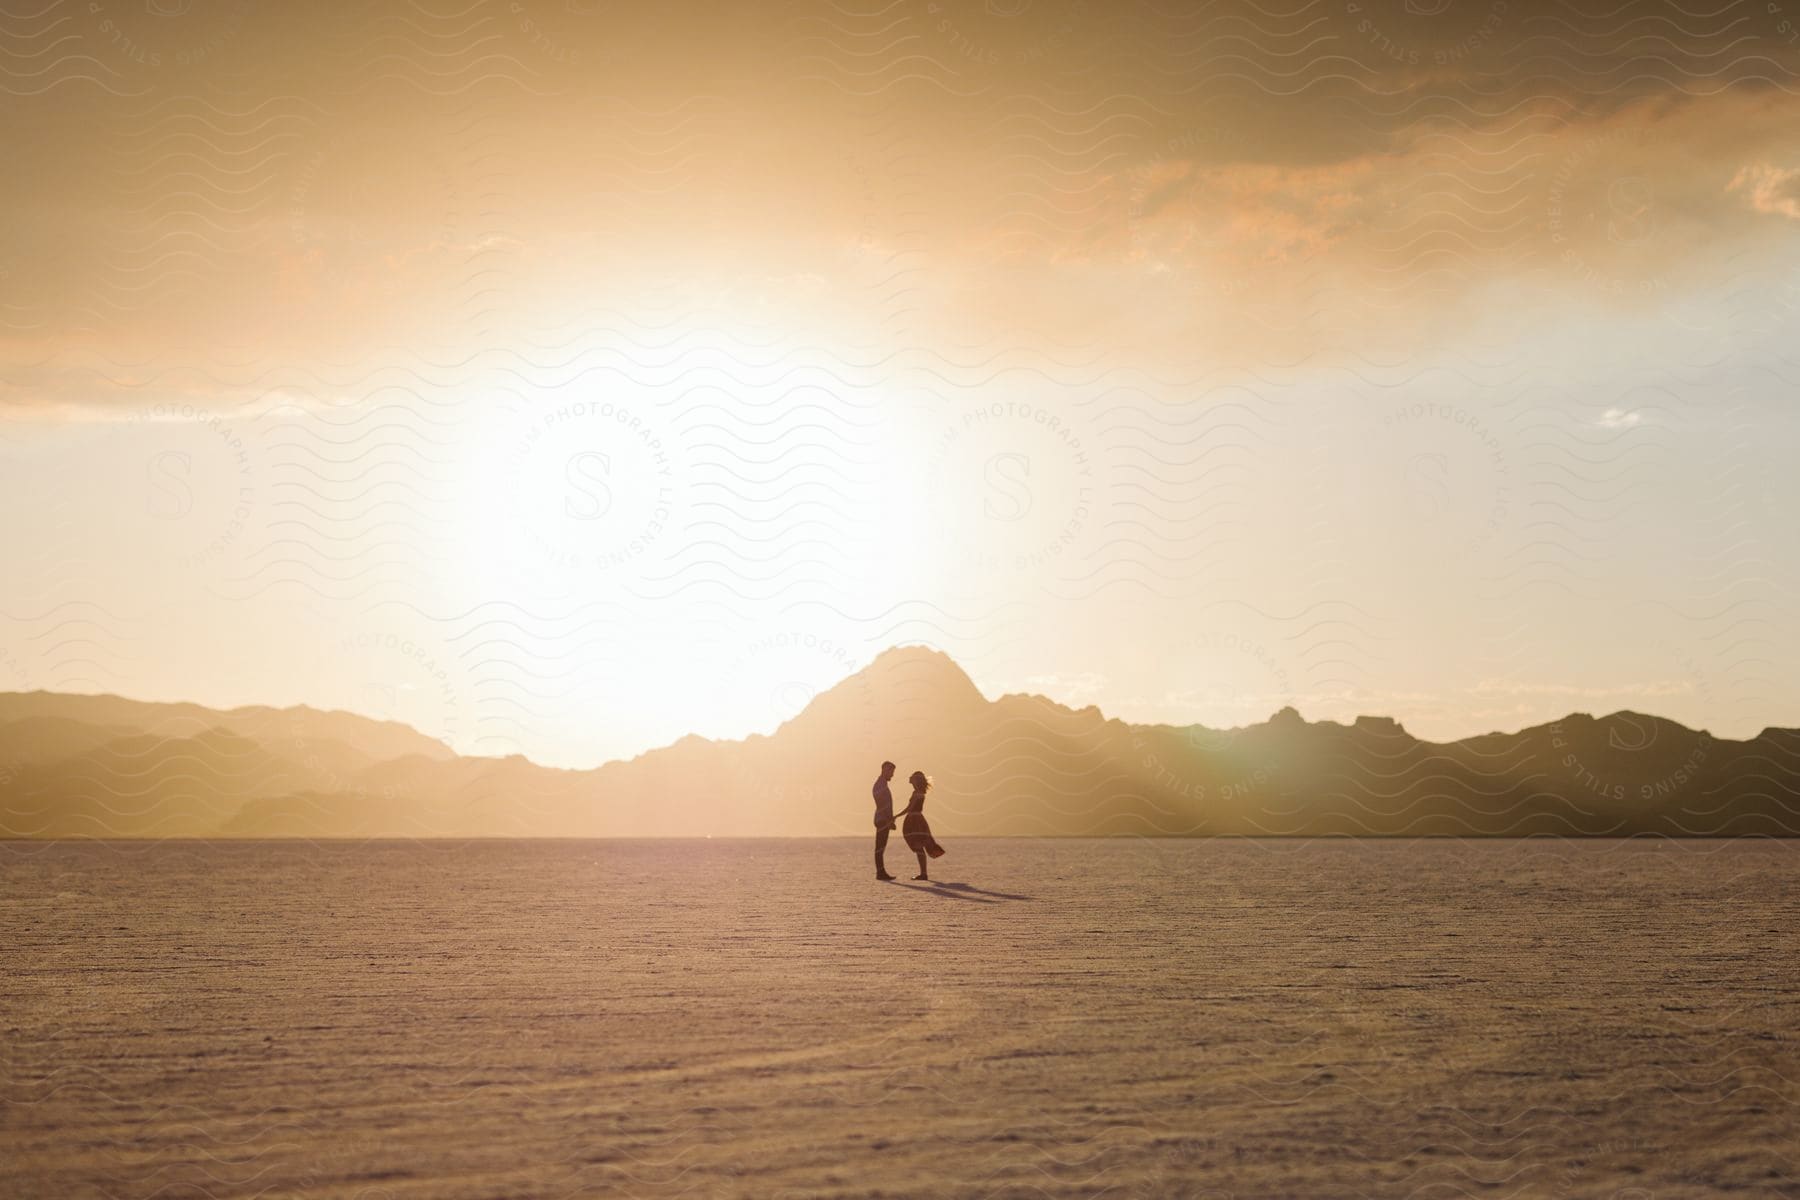 Stock photo of a romantic couple standing in a flat desert landscape with mountains on the horizon